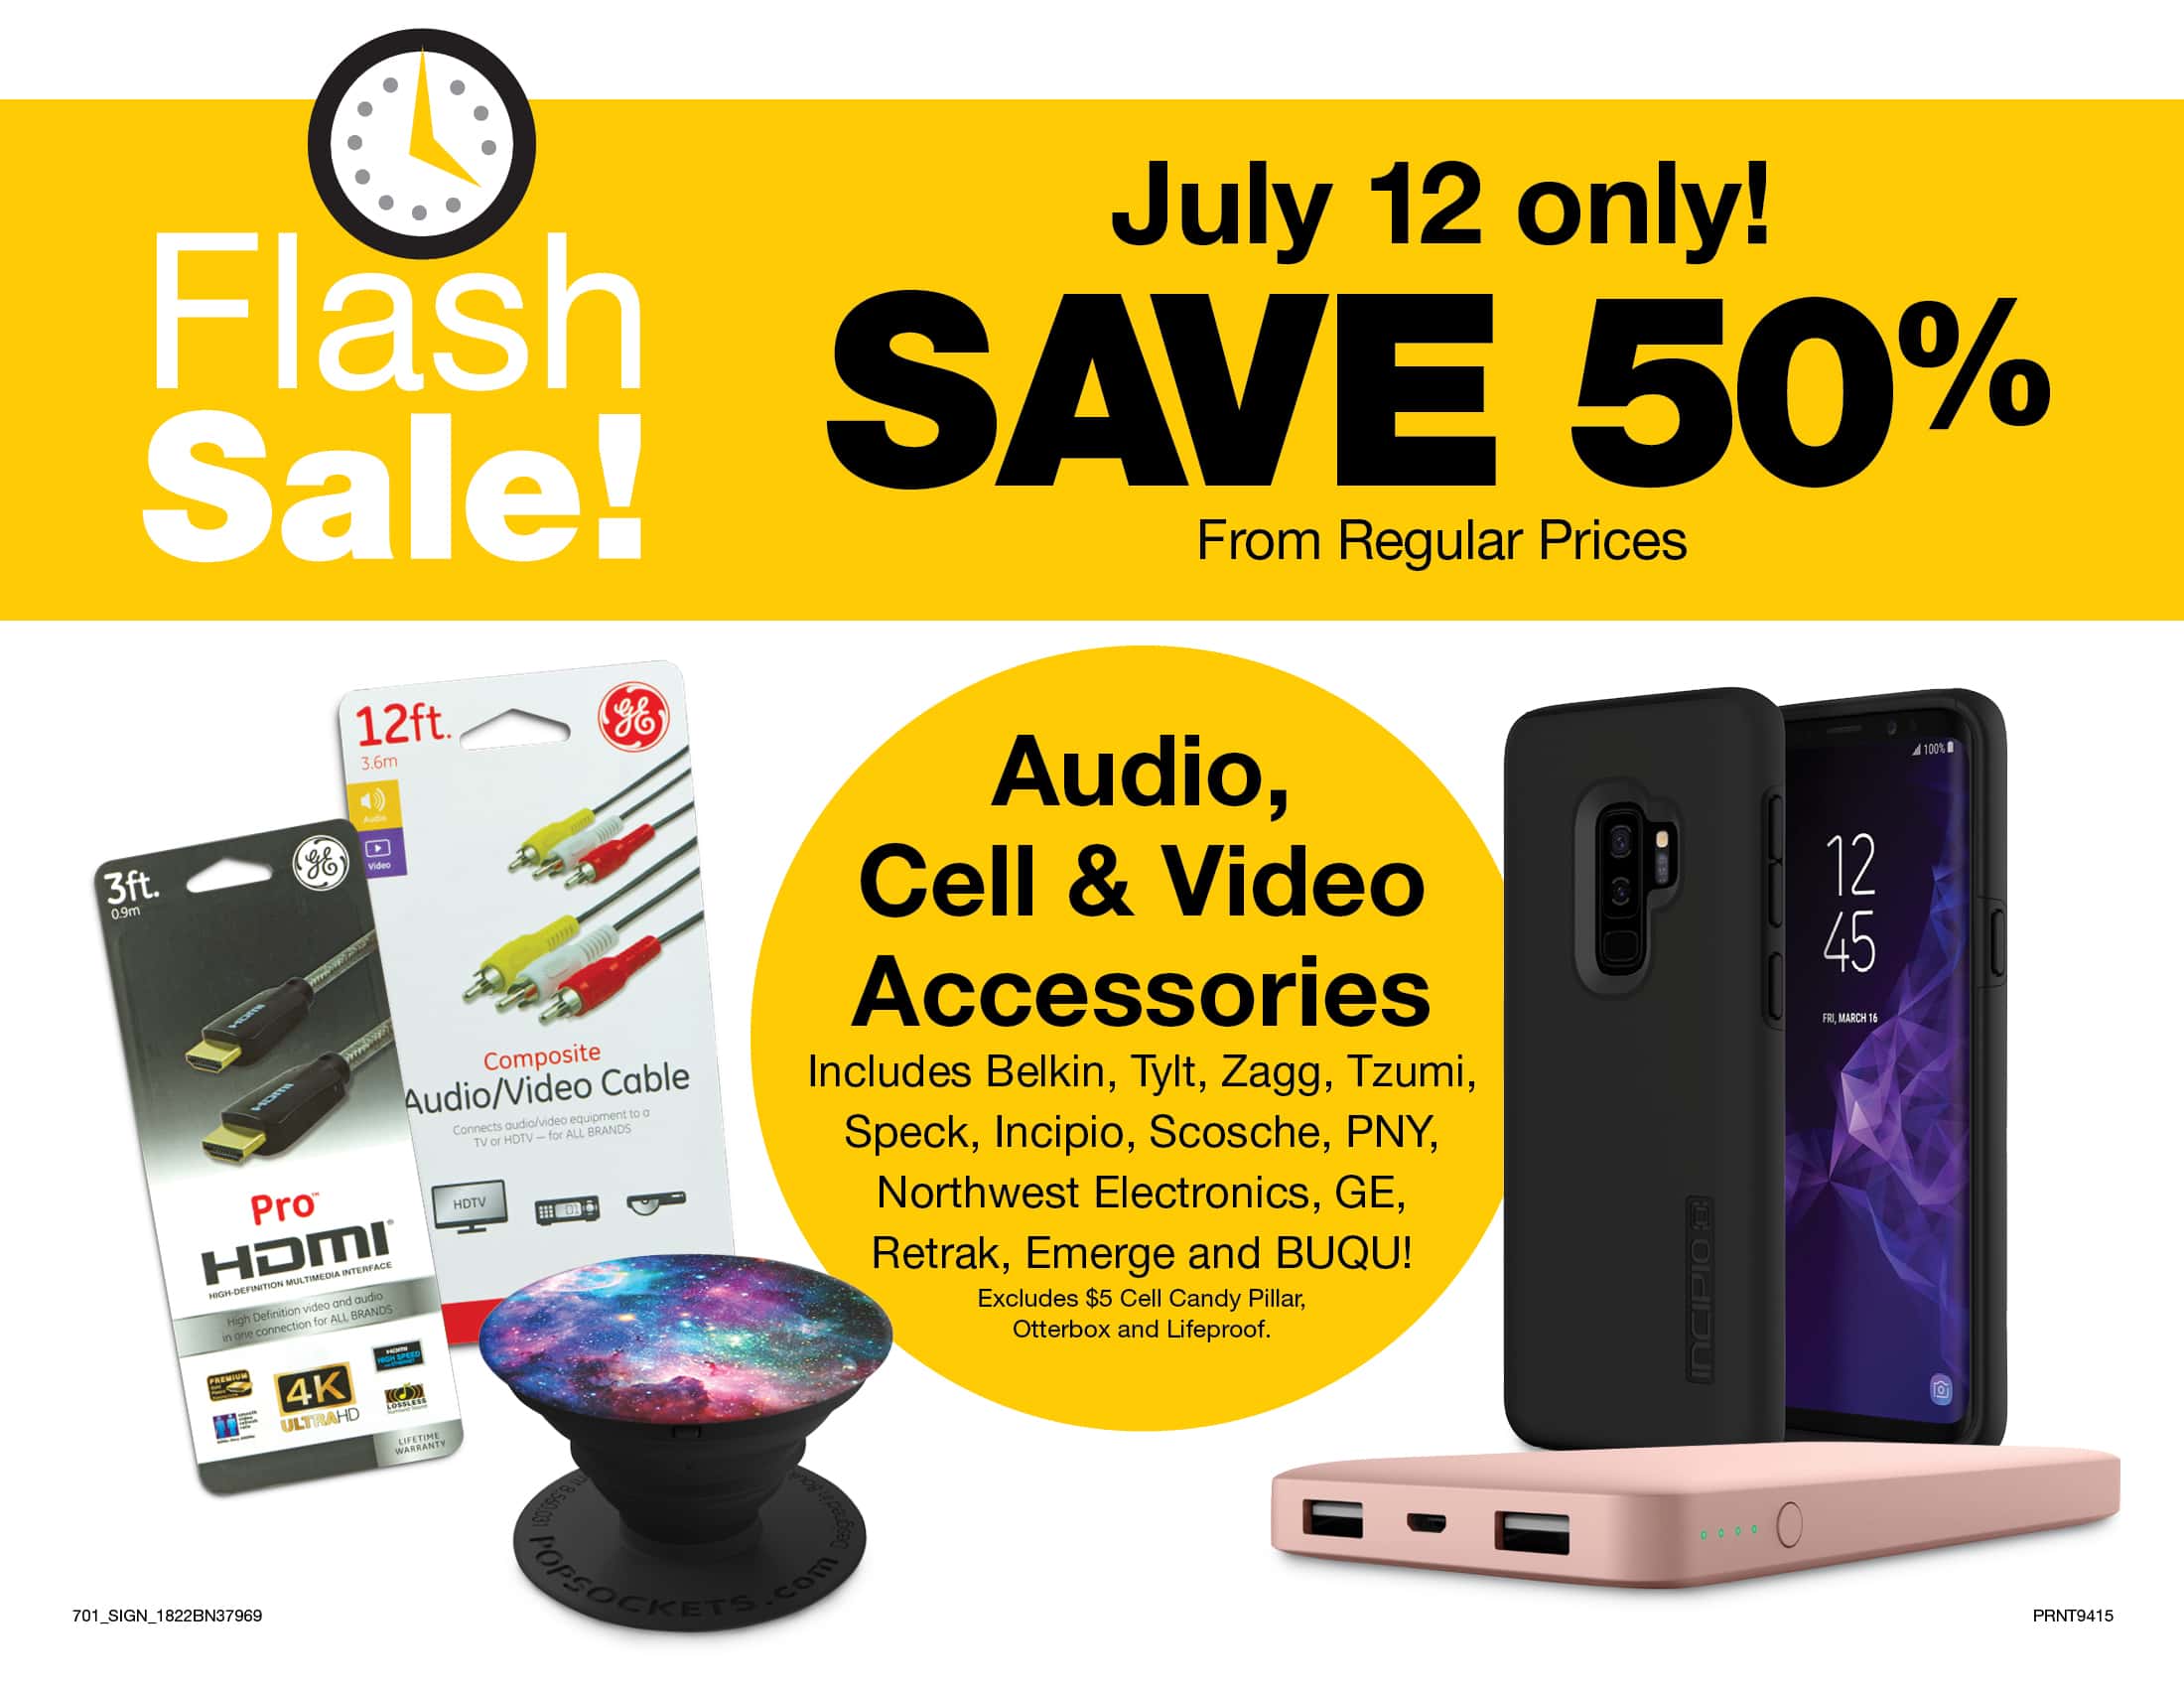 Fred Meyer Flash Sale - 50% off Audio, Video & Cell Accessories